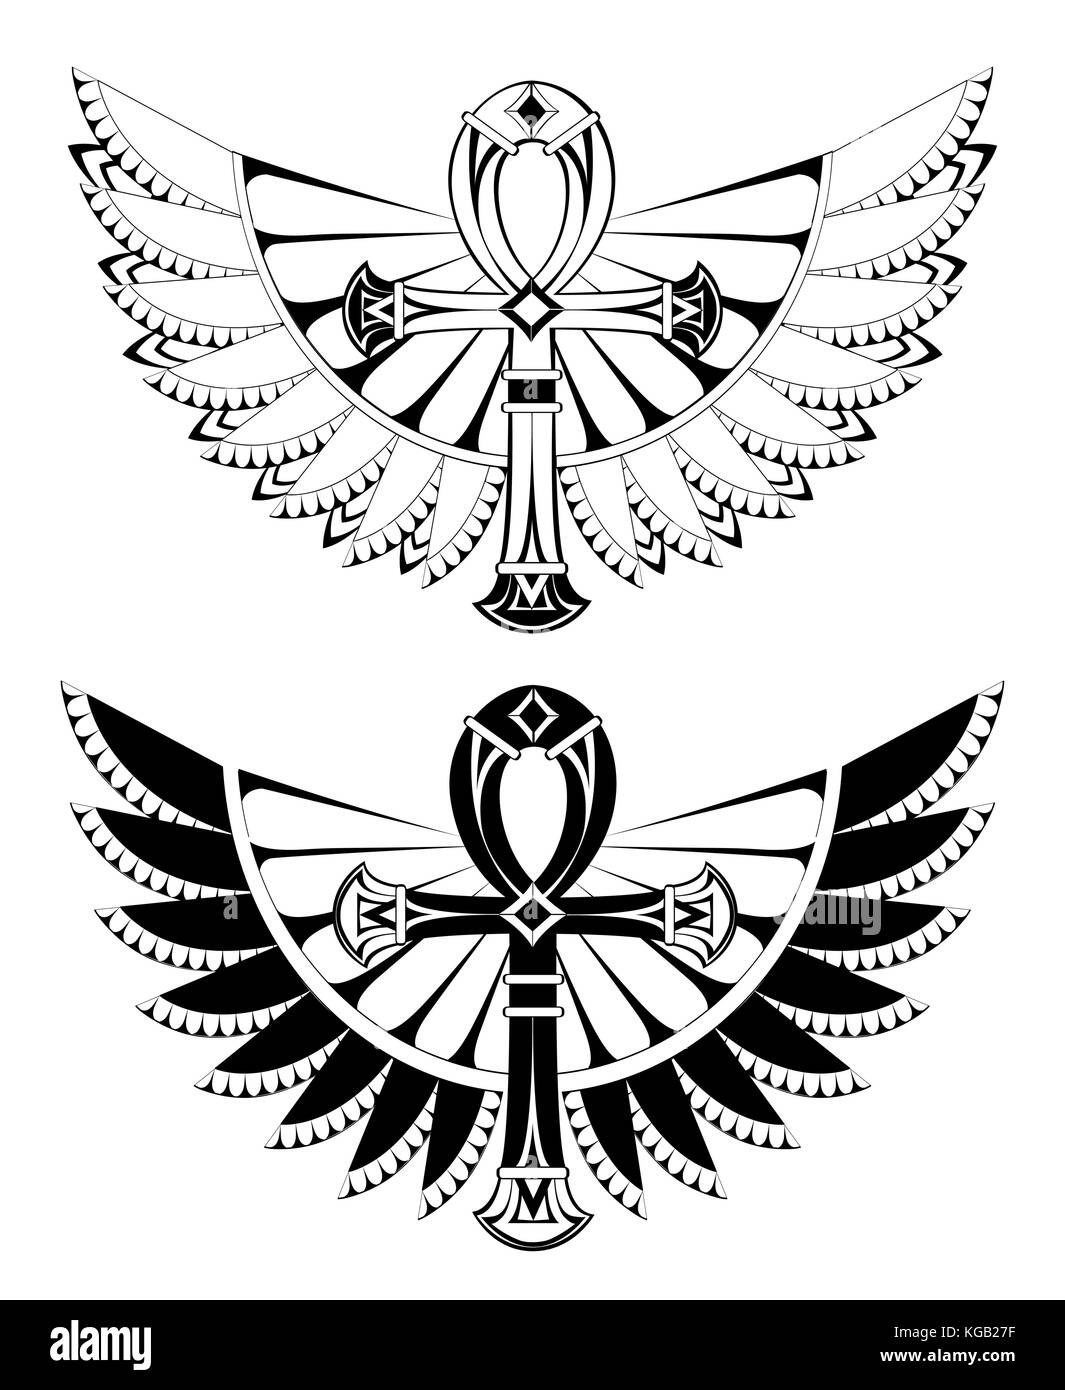 Two artistically drawn, contoured ankhs with wings on a white background. Tattoos style. Element of design. Egyptian Cross. Black ankh Stock Vector